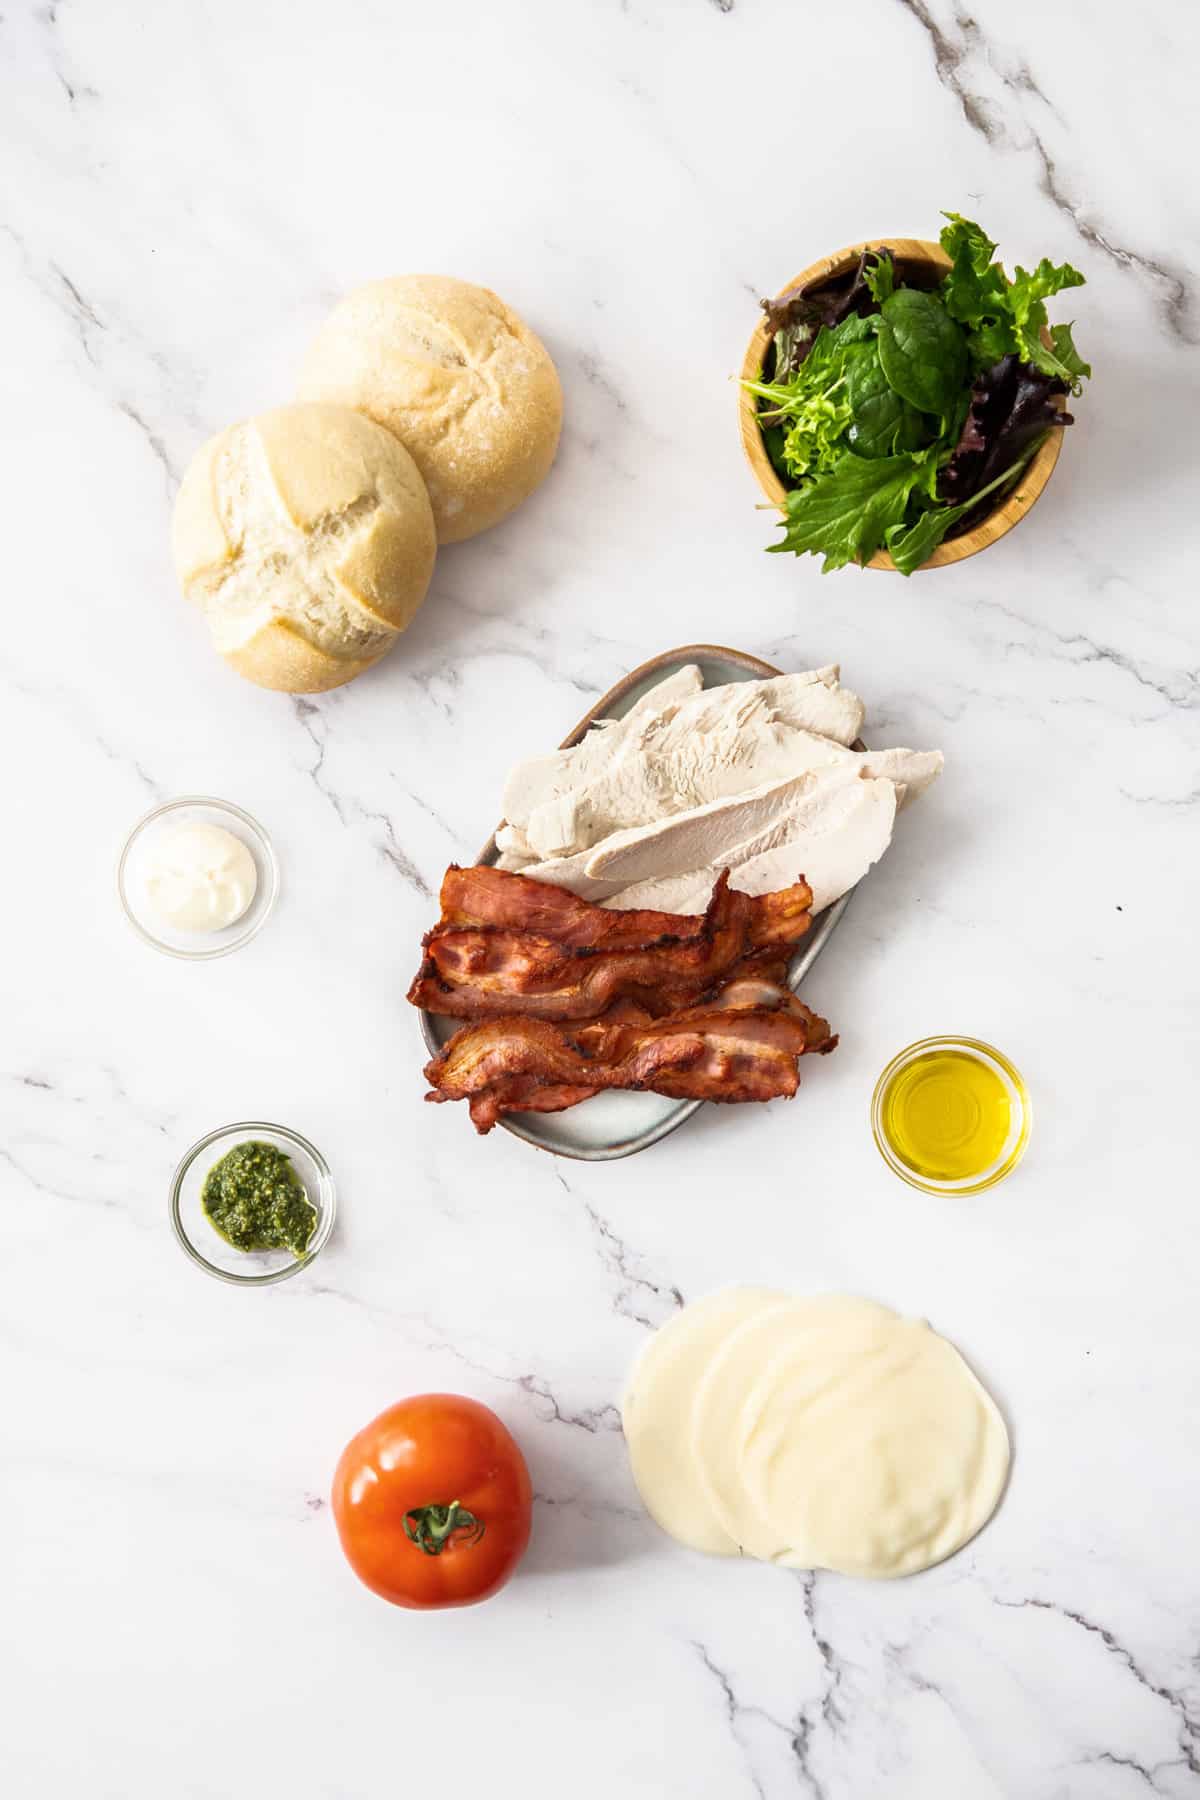 rolls, greens, tomato, cheese, turkey, bacon, and other ingredients on a white board.